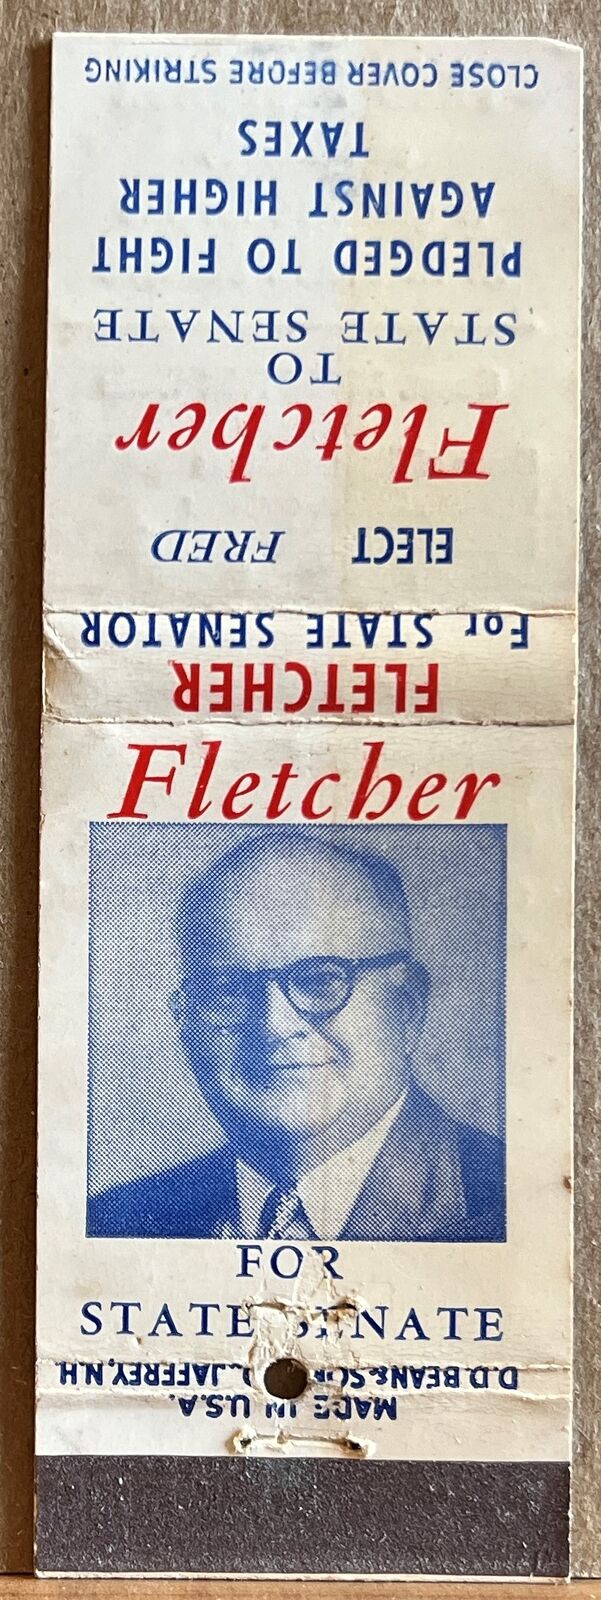 Fred Fletcher of Milford NH for New Hampshire State Senator Matchbook Cover